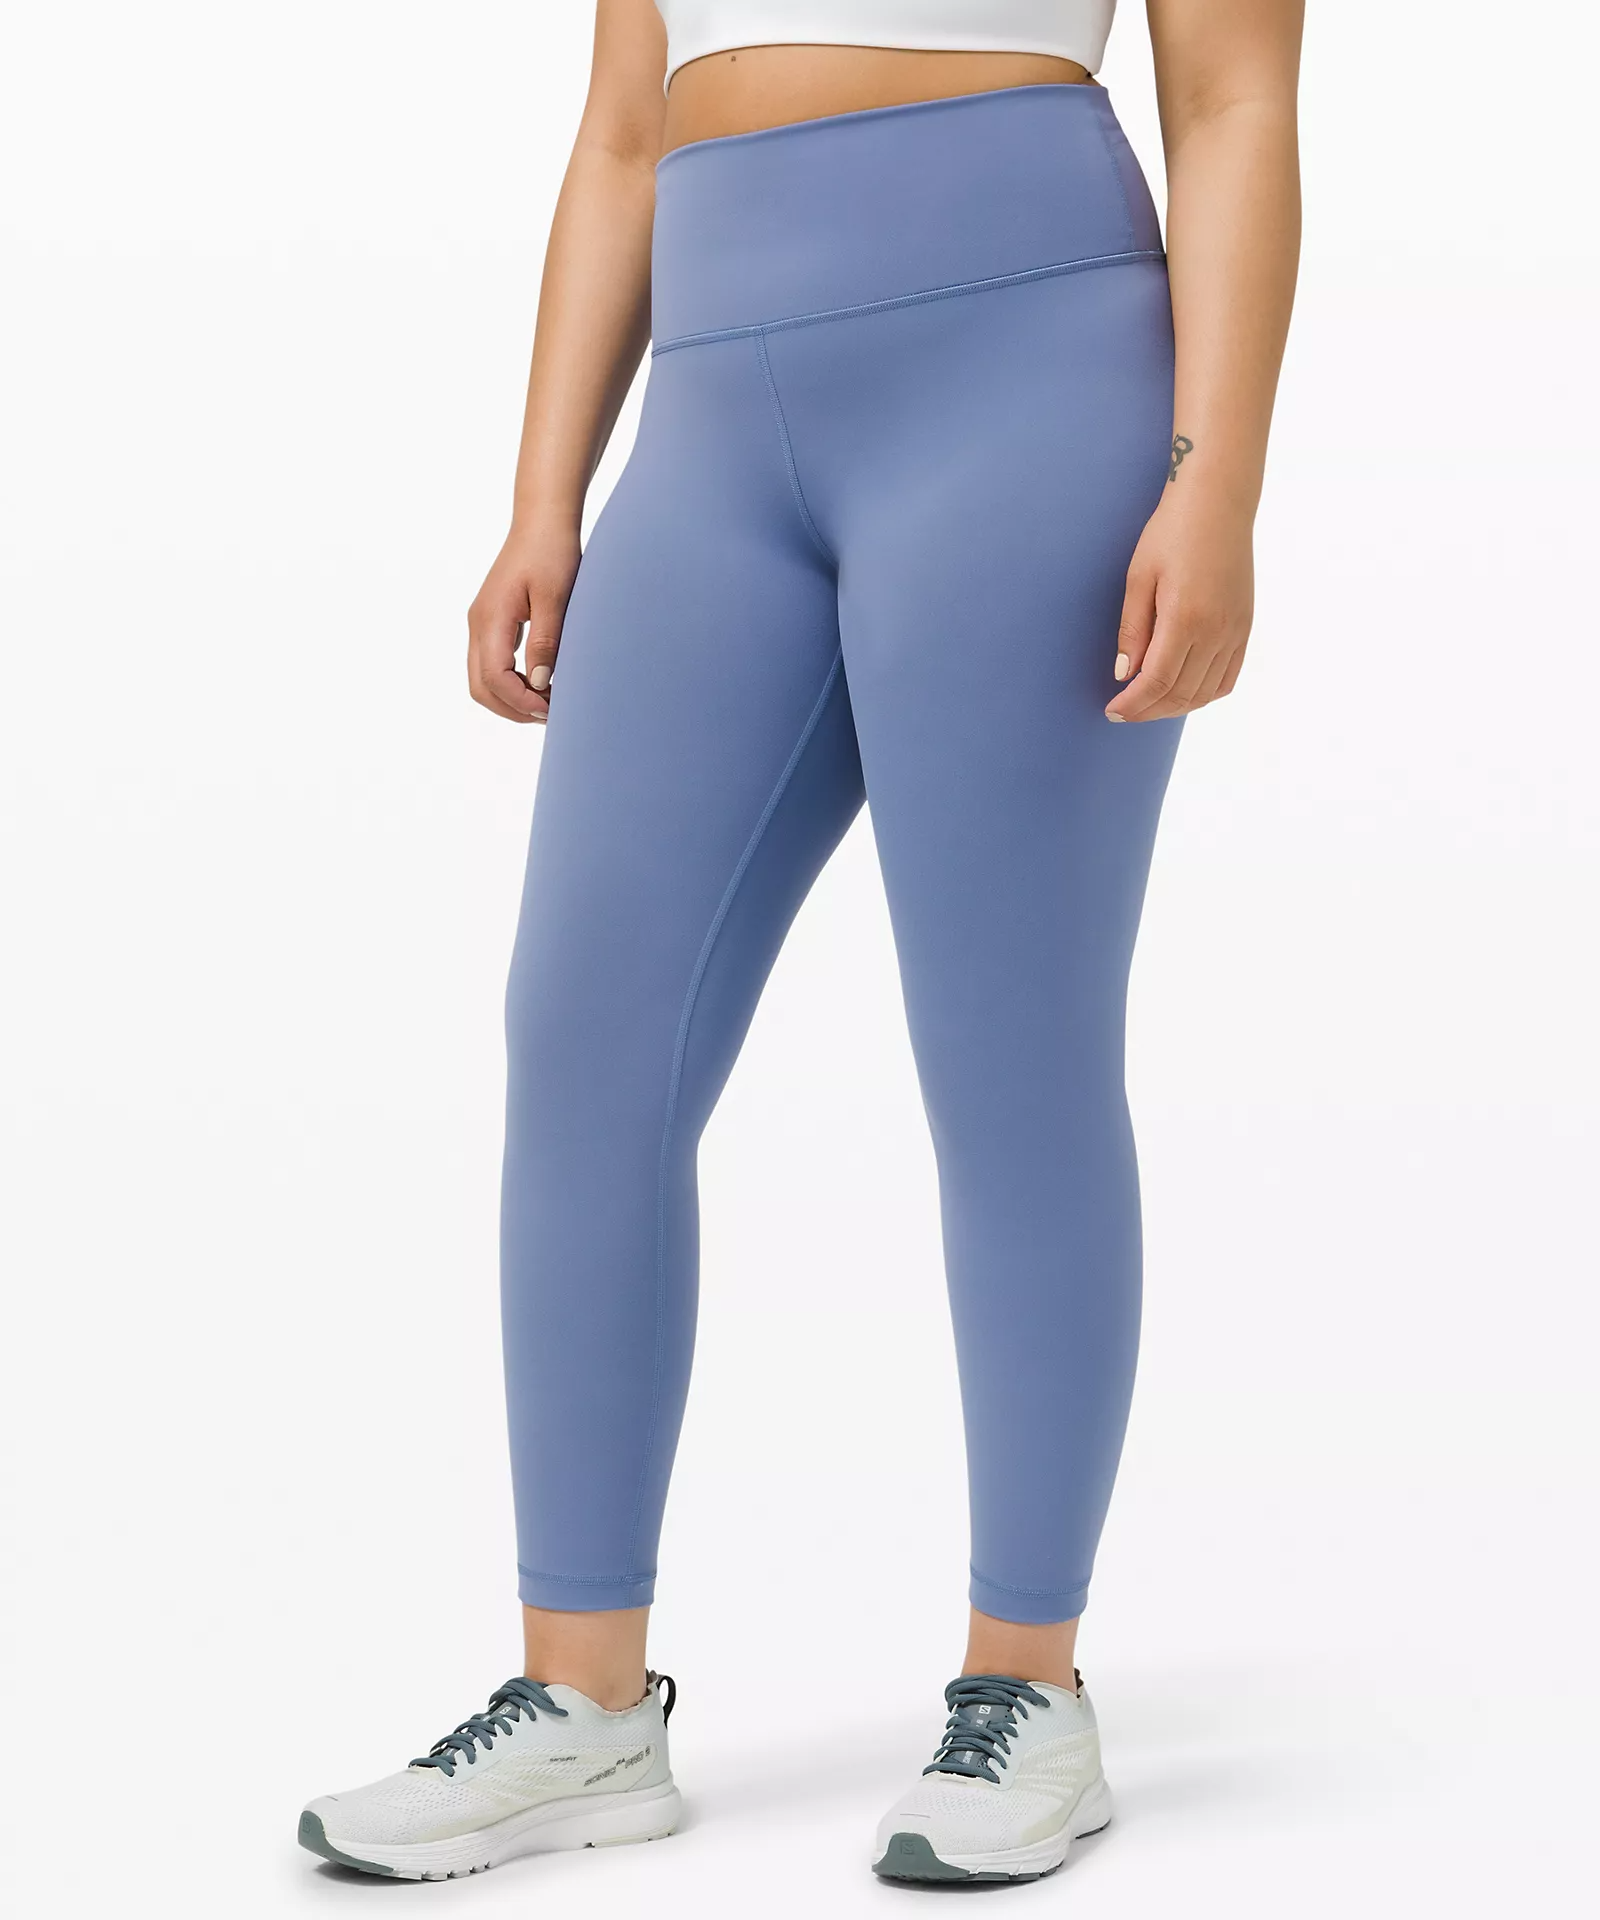 Lululemon's Presidents Day Sale Has Leggings, Tops, and More